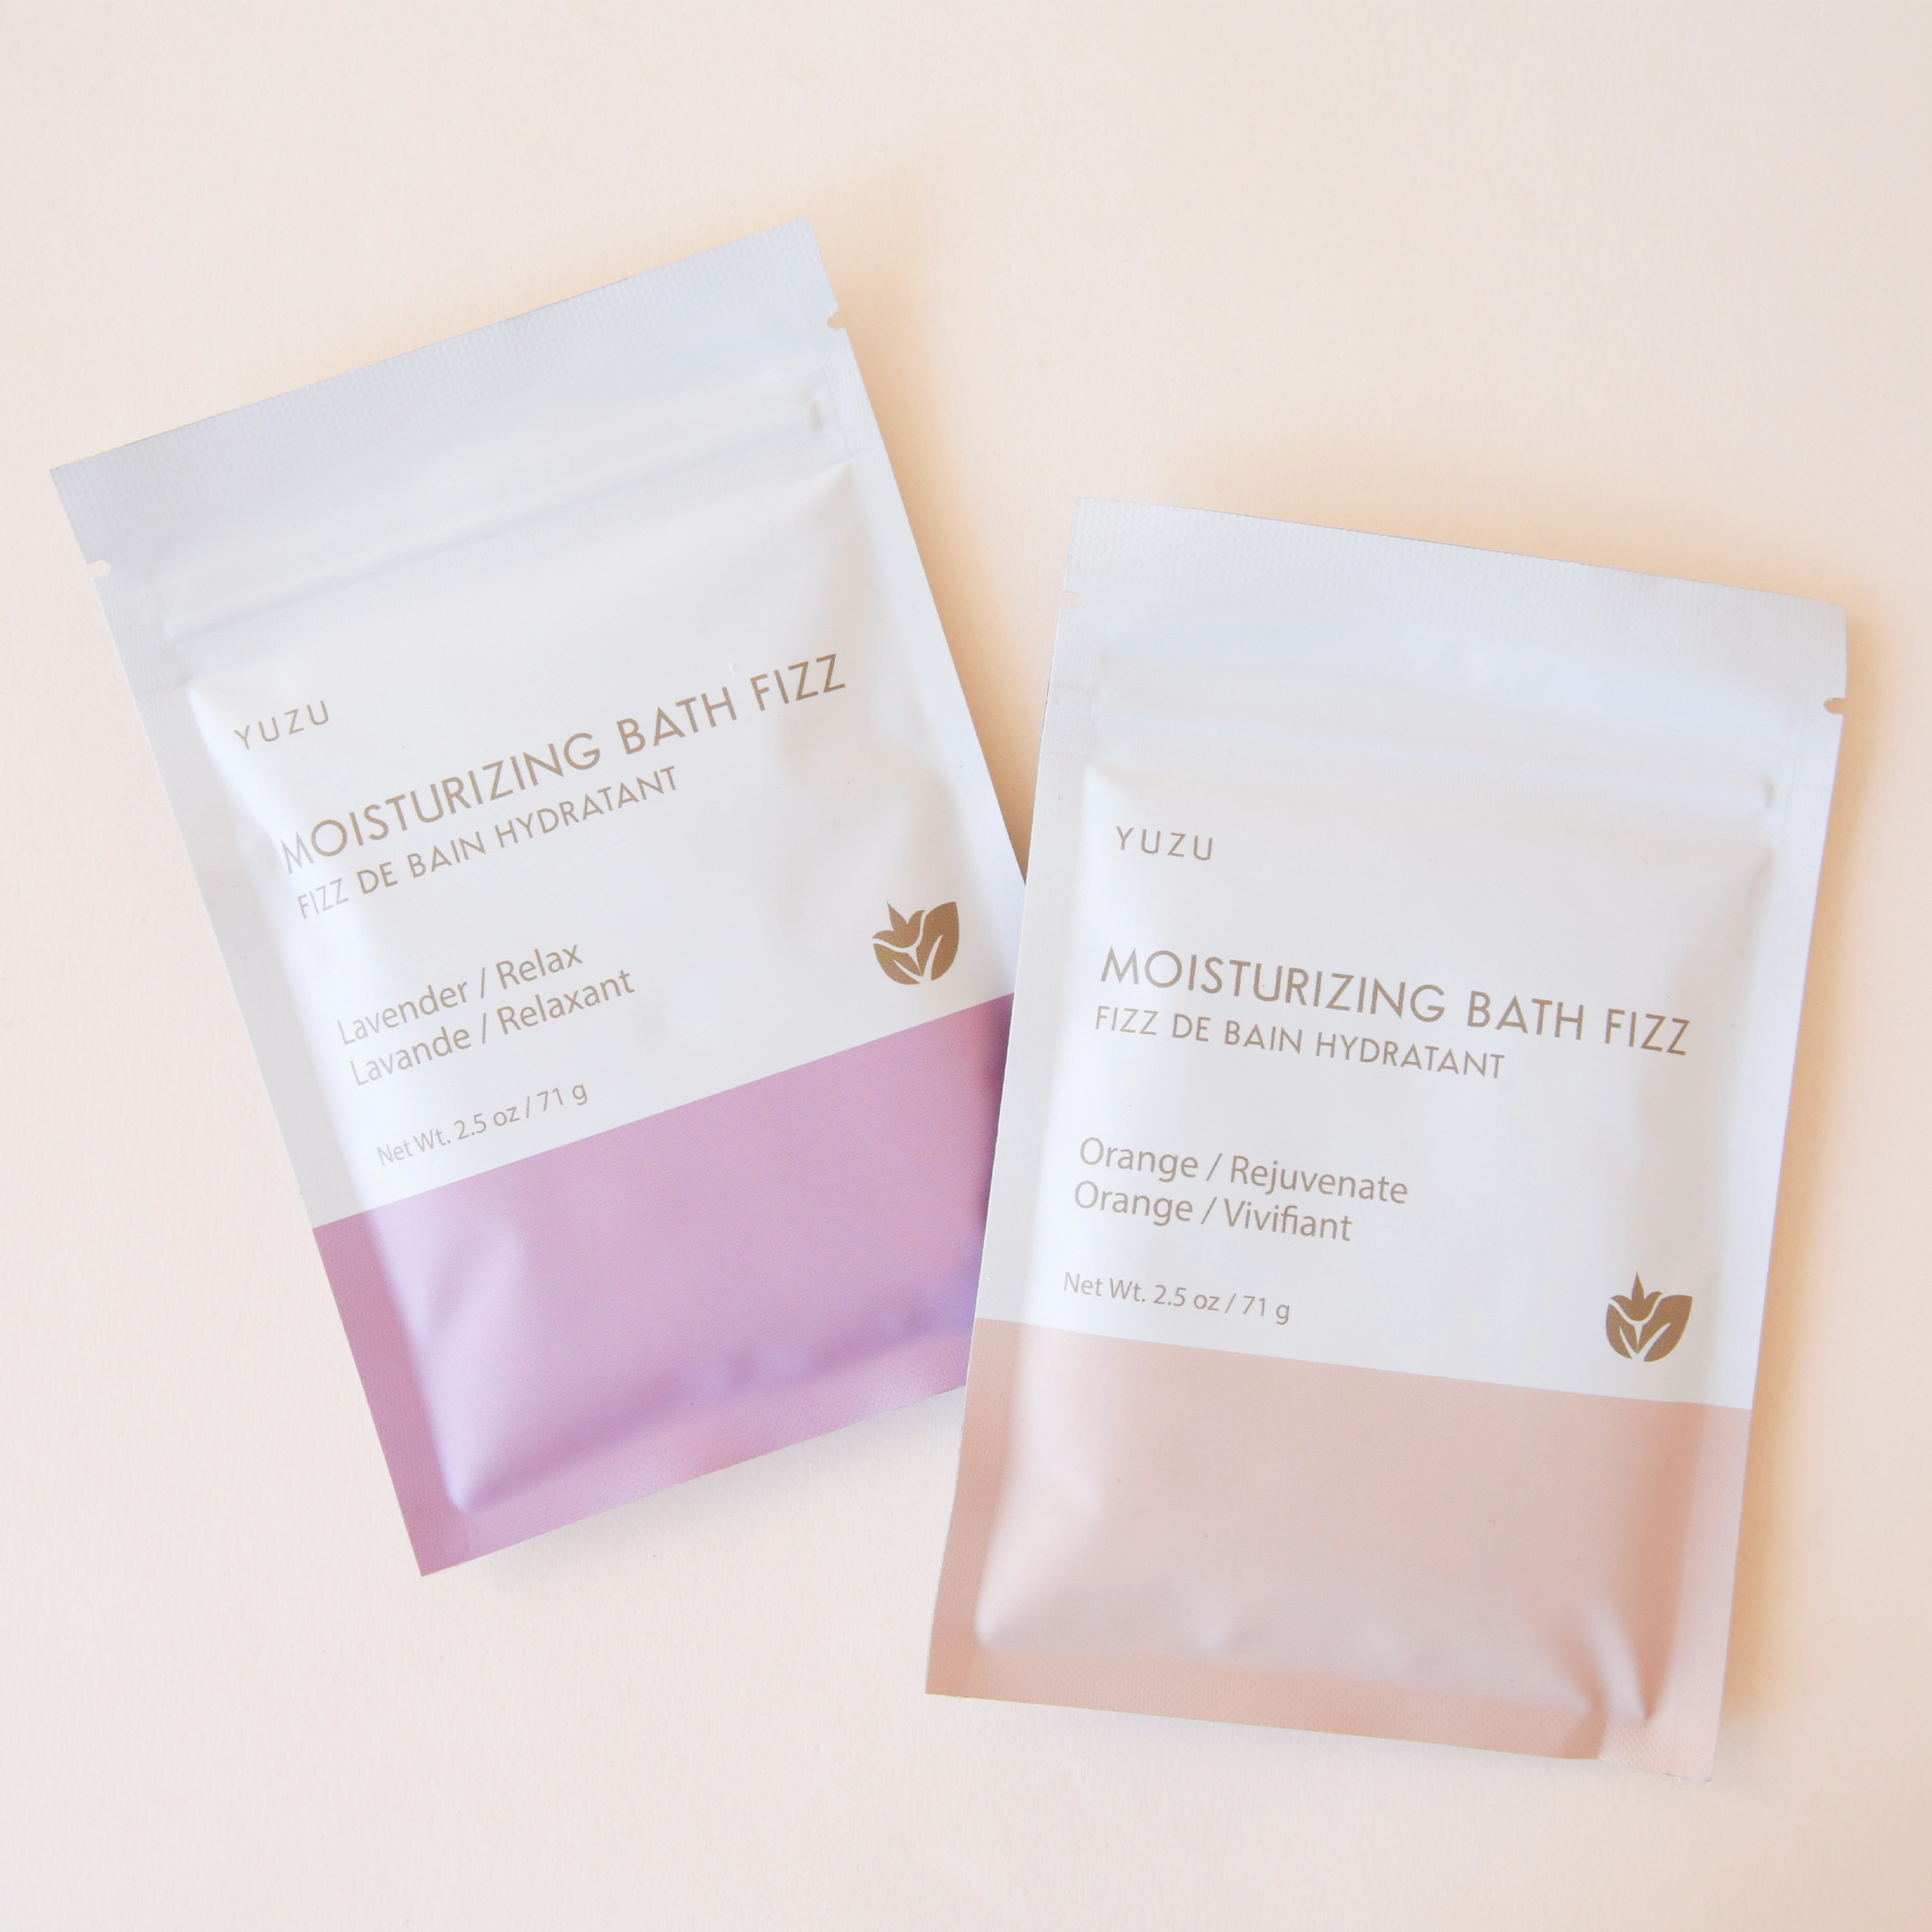 A packet of bath salts with the bottom half a light pink color and the top half white along with text on the front that reads, "Moisturizing Bath Fizz, Lavender / Relax" photographed with the Orange scent that's also available on our website.